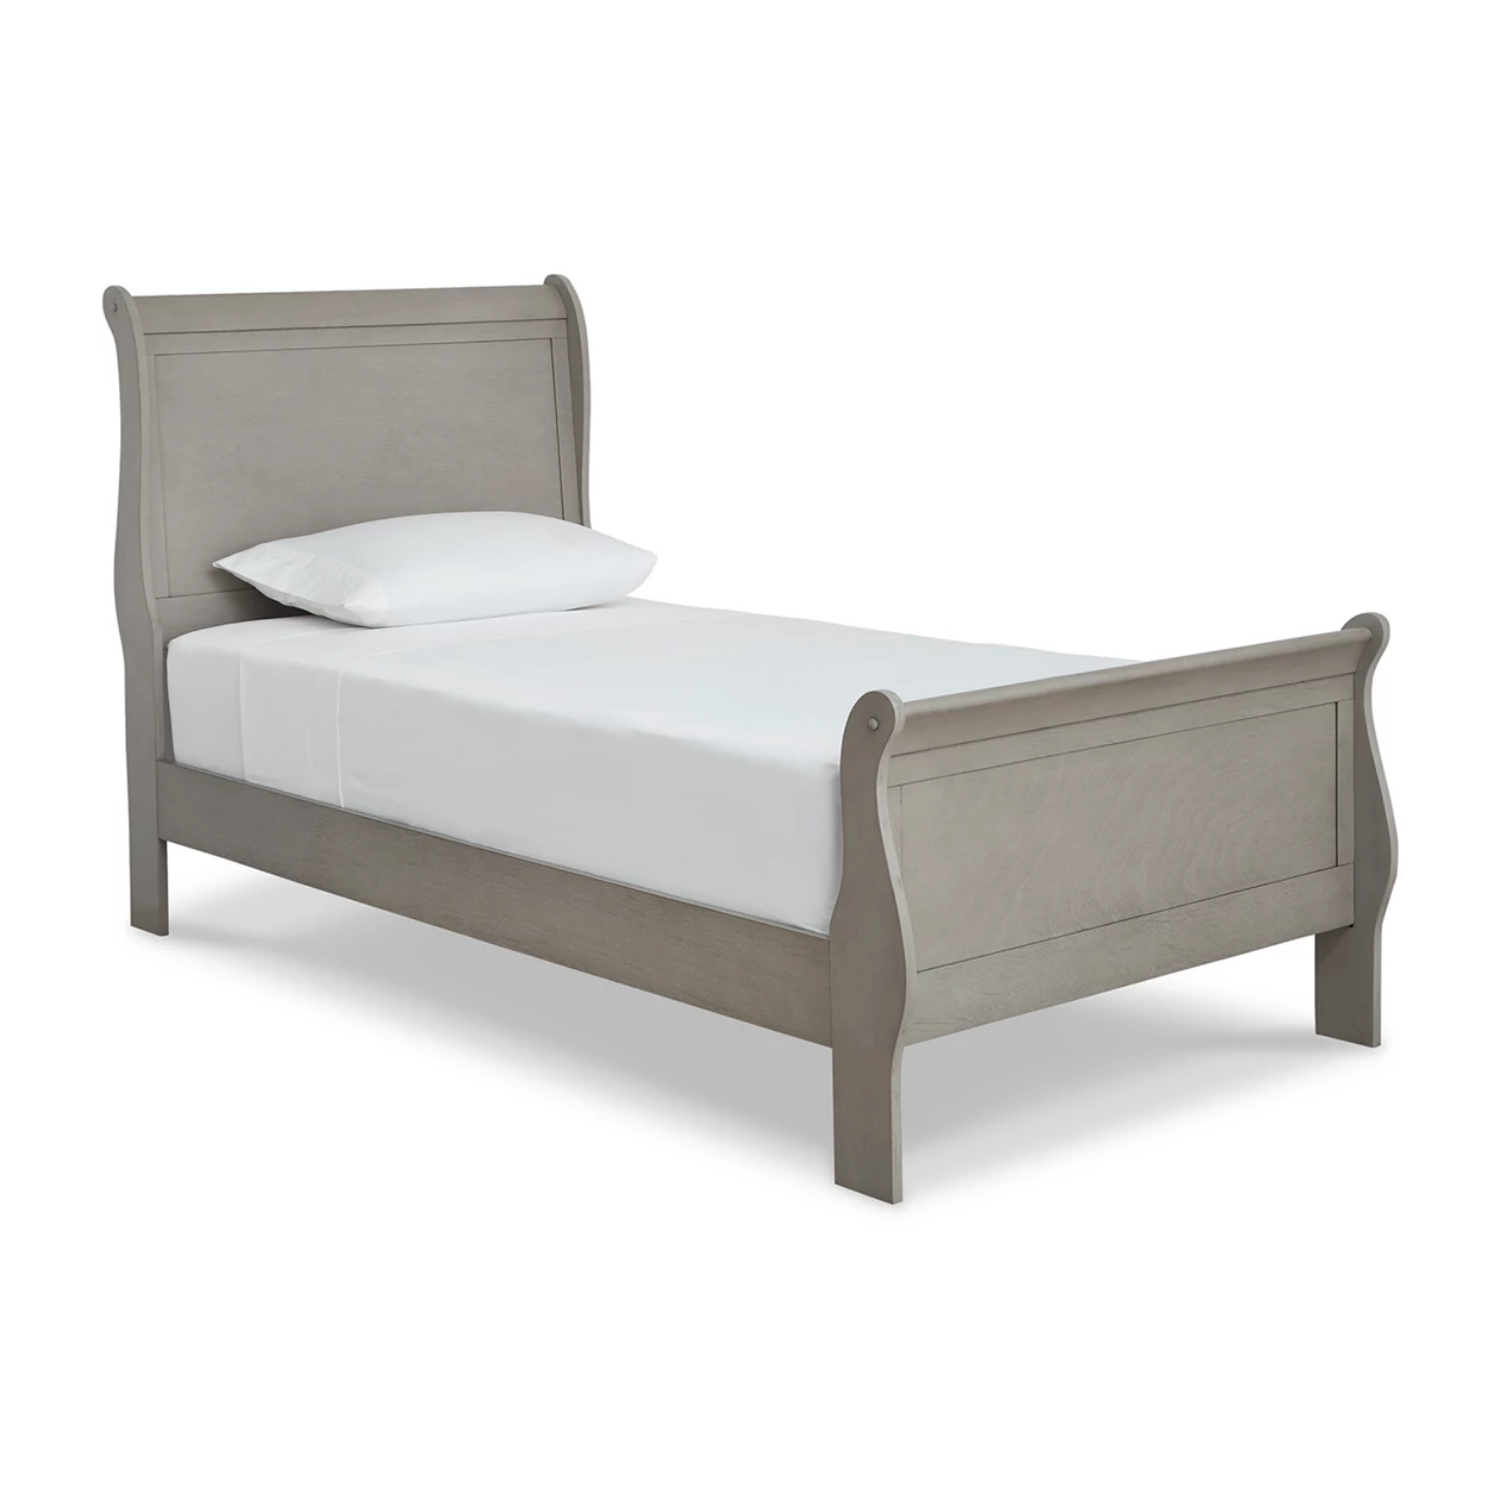 Willowton Panel Bed